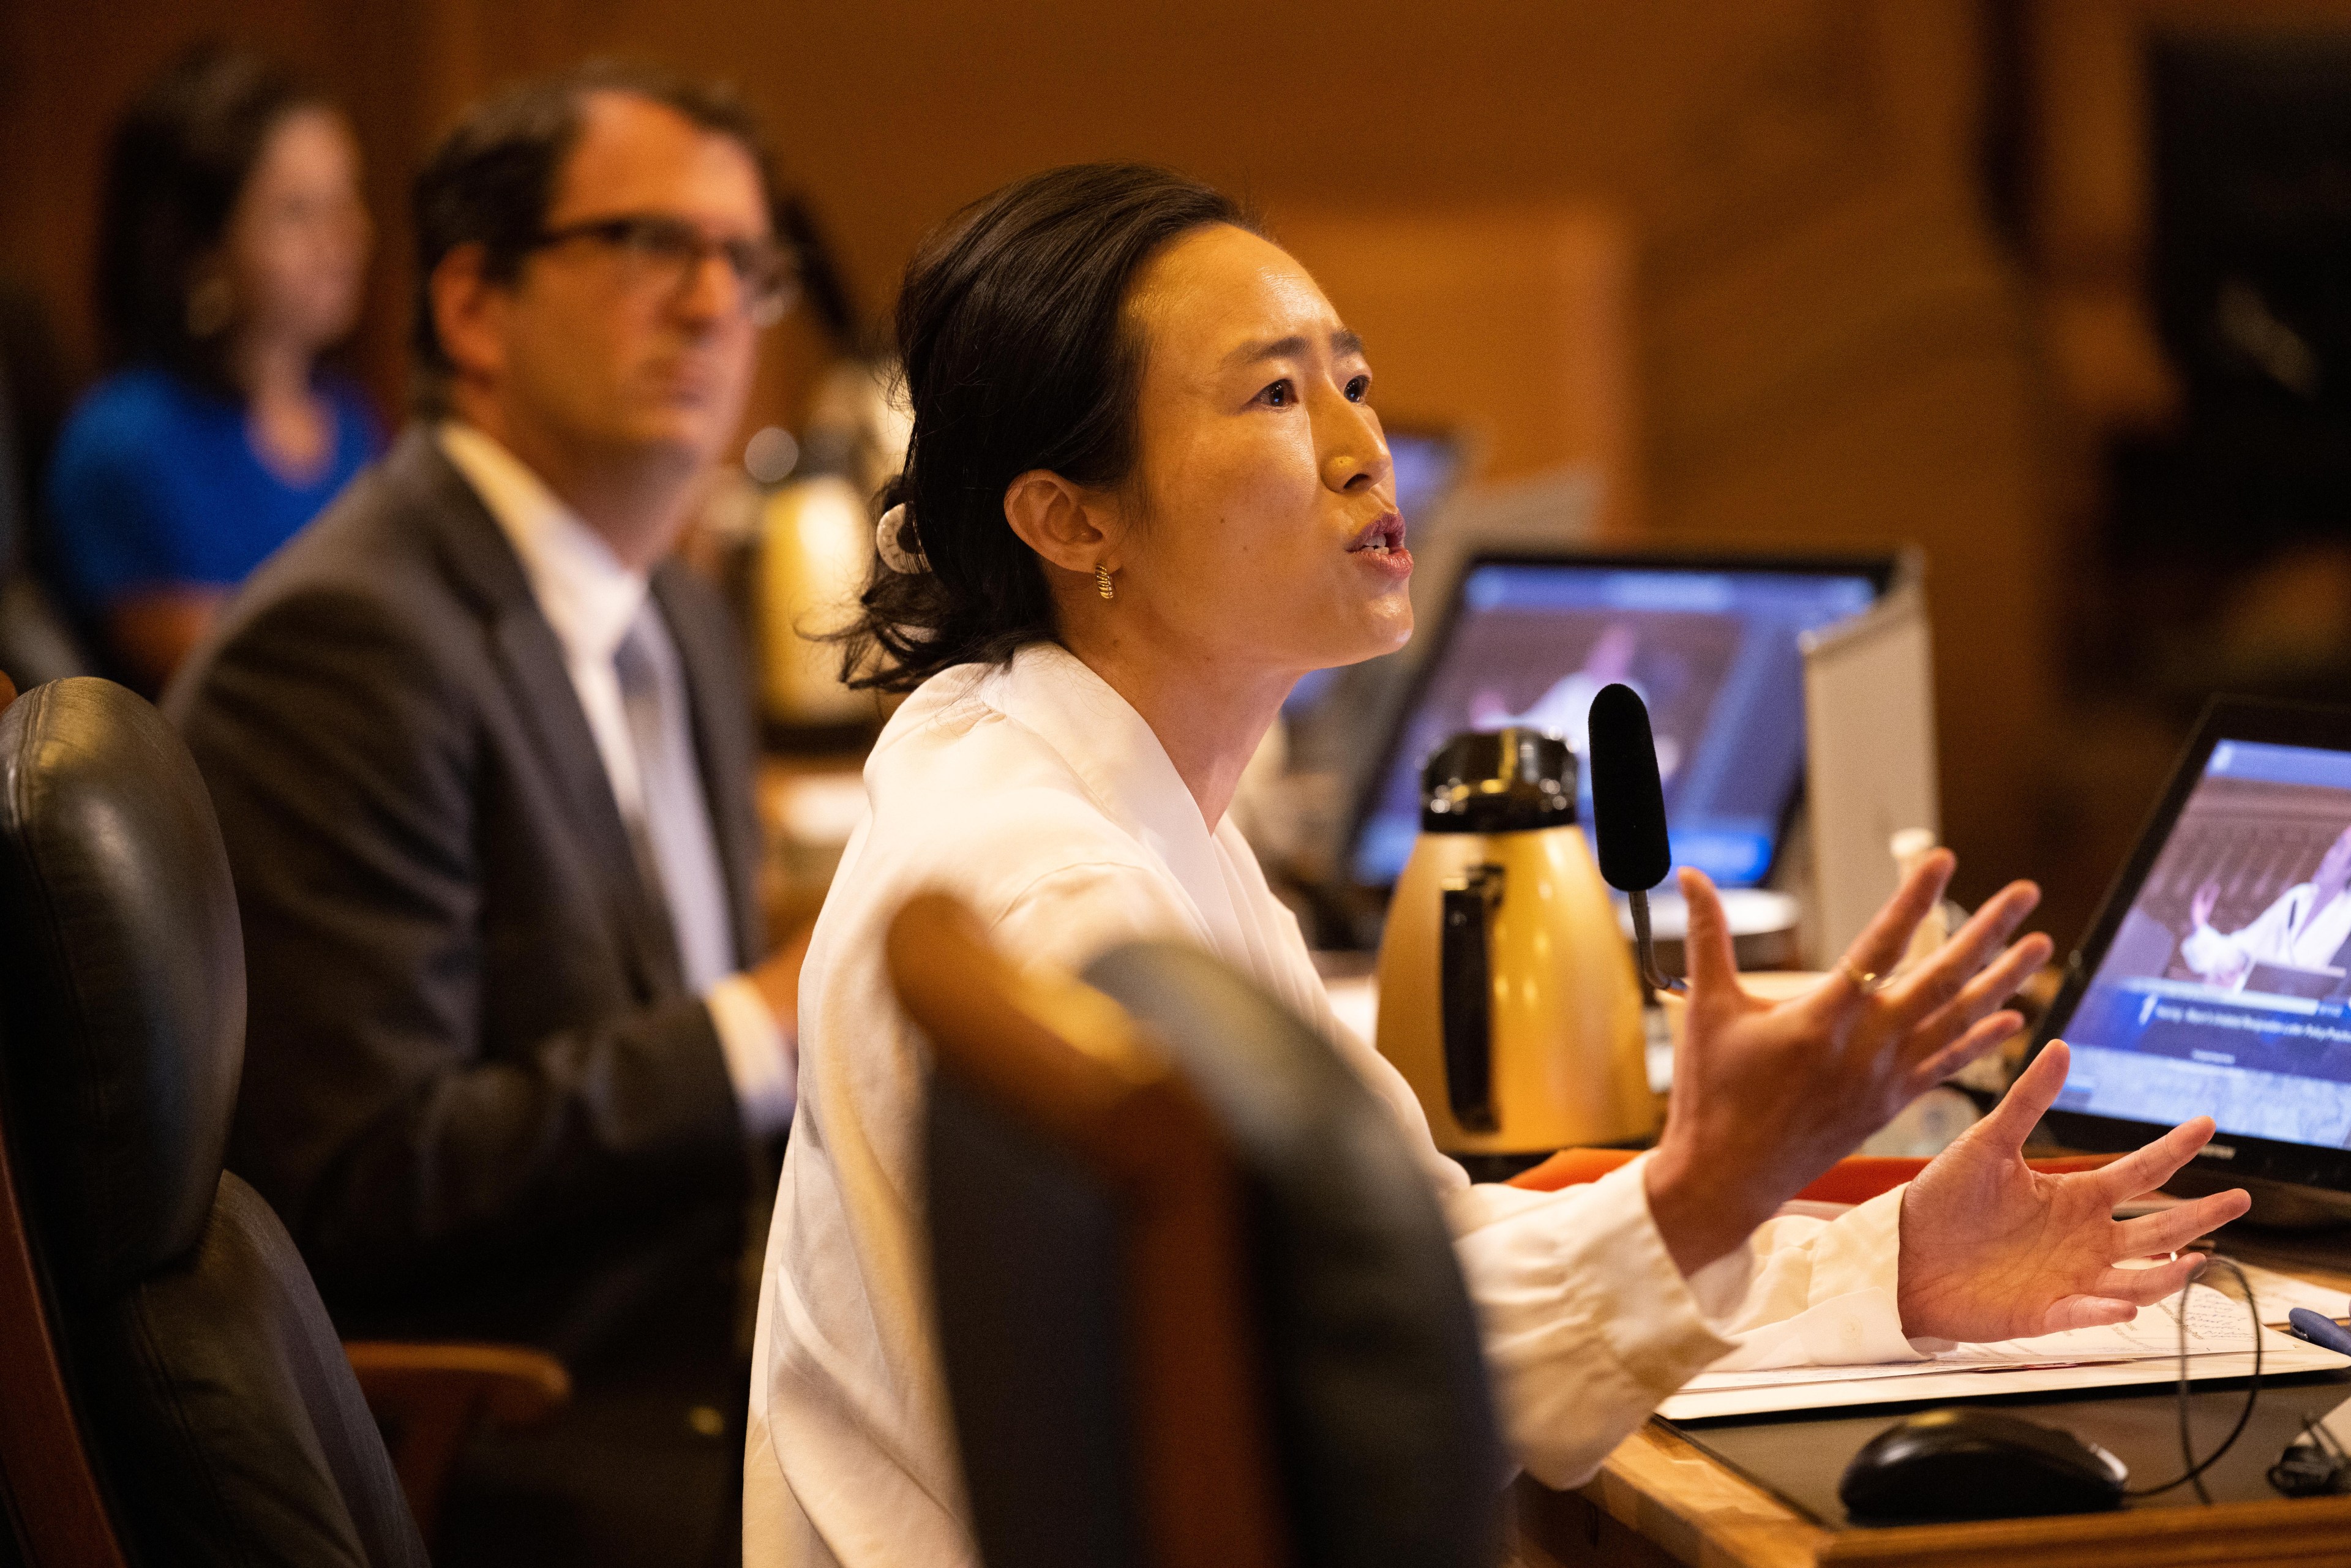 Supervisor Connie Chan, wearing a white top, looks exasperated and gestures with her hands while speaking in the Board of Supervisors chambers at City Hall. 